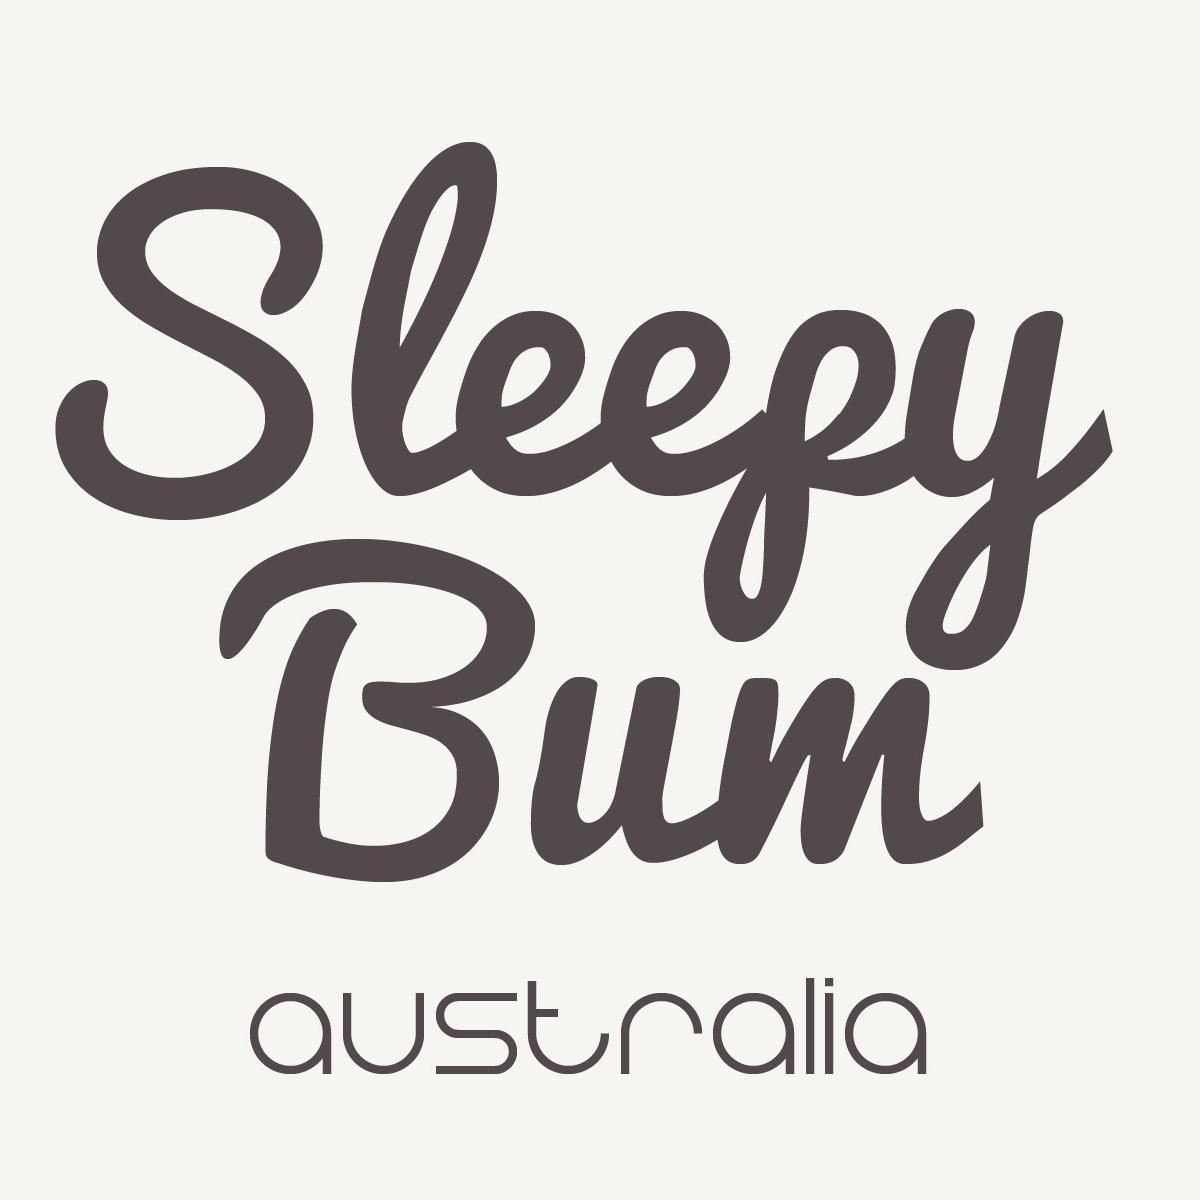 Bedding products for Aussies